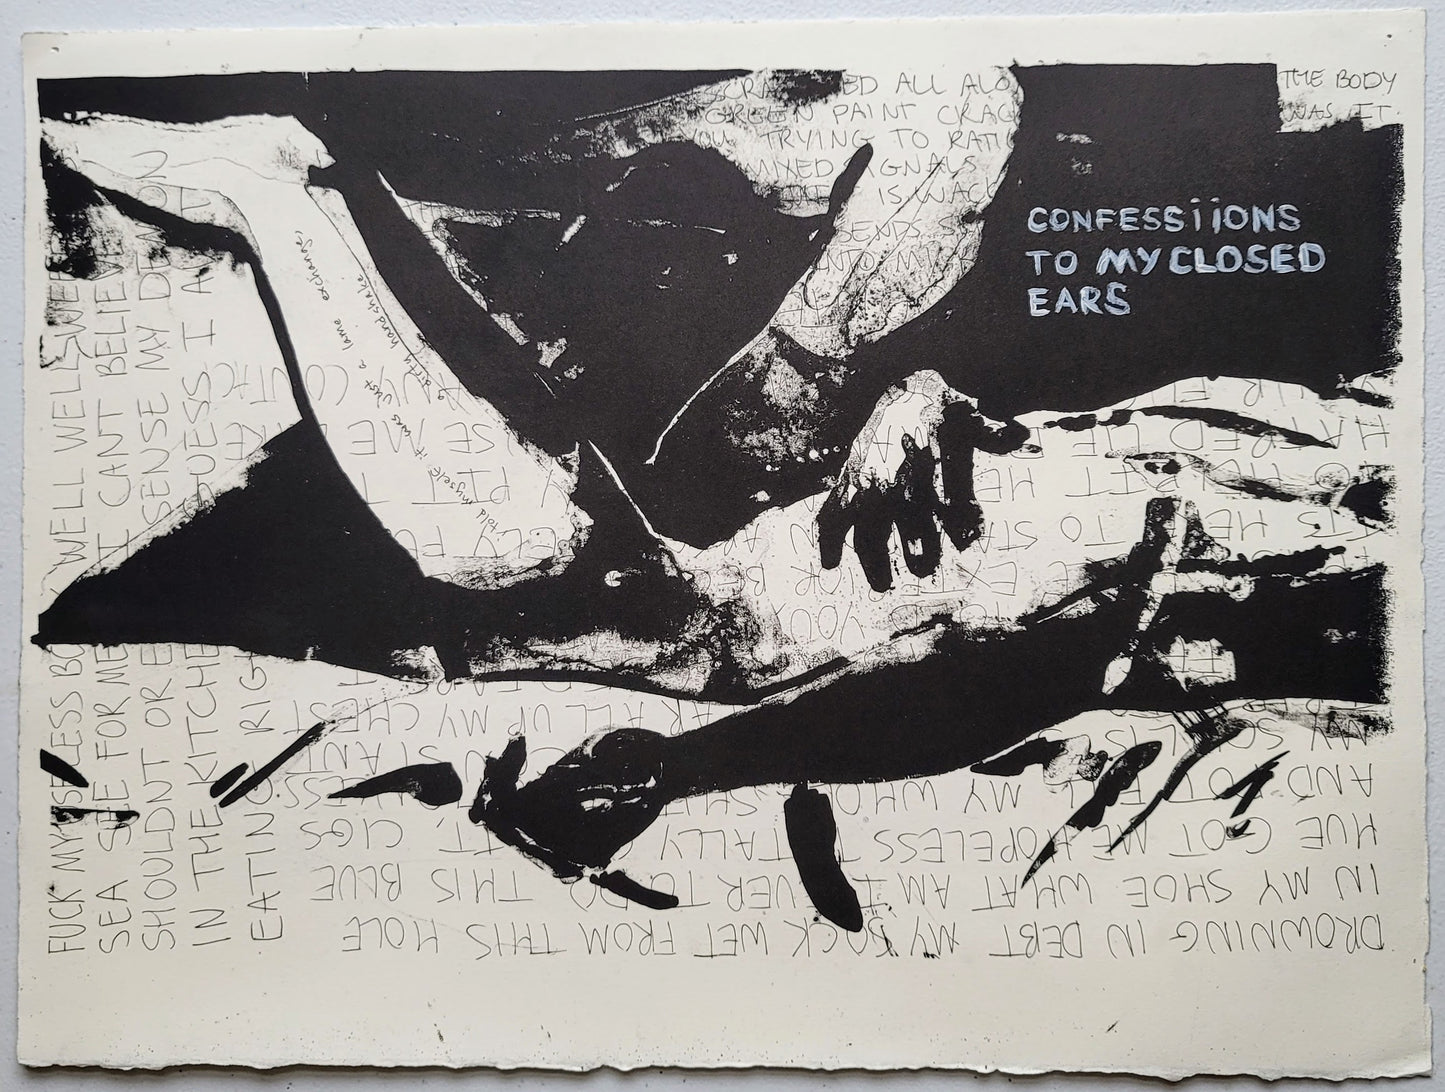 "Confession", 2020, lithographic print and mixed media on paper, 11 x 15 inches